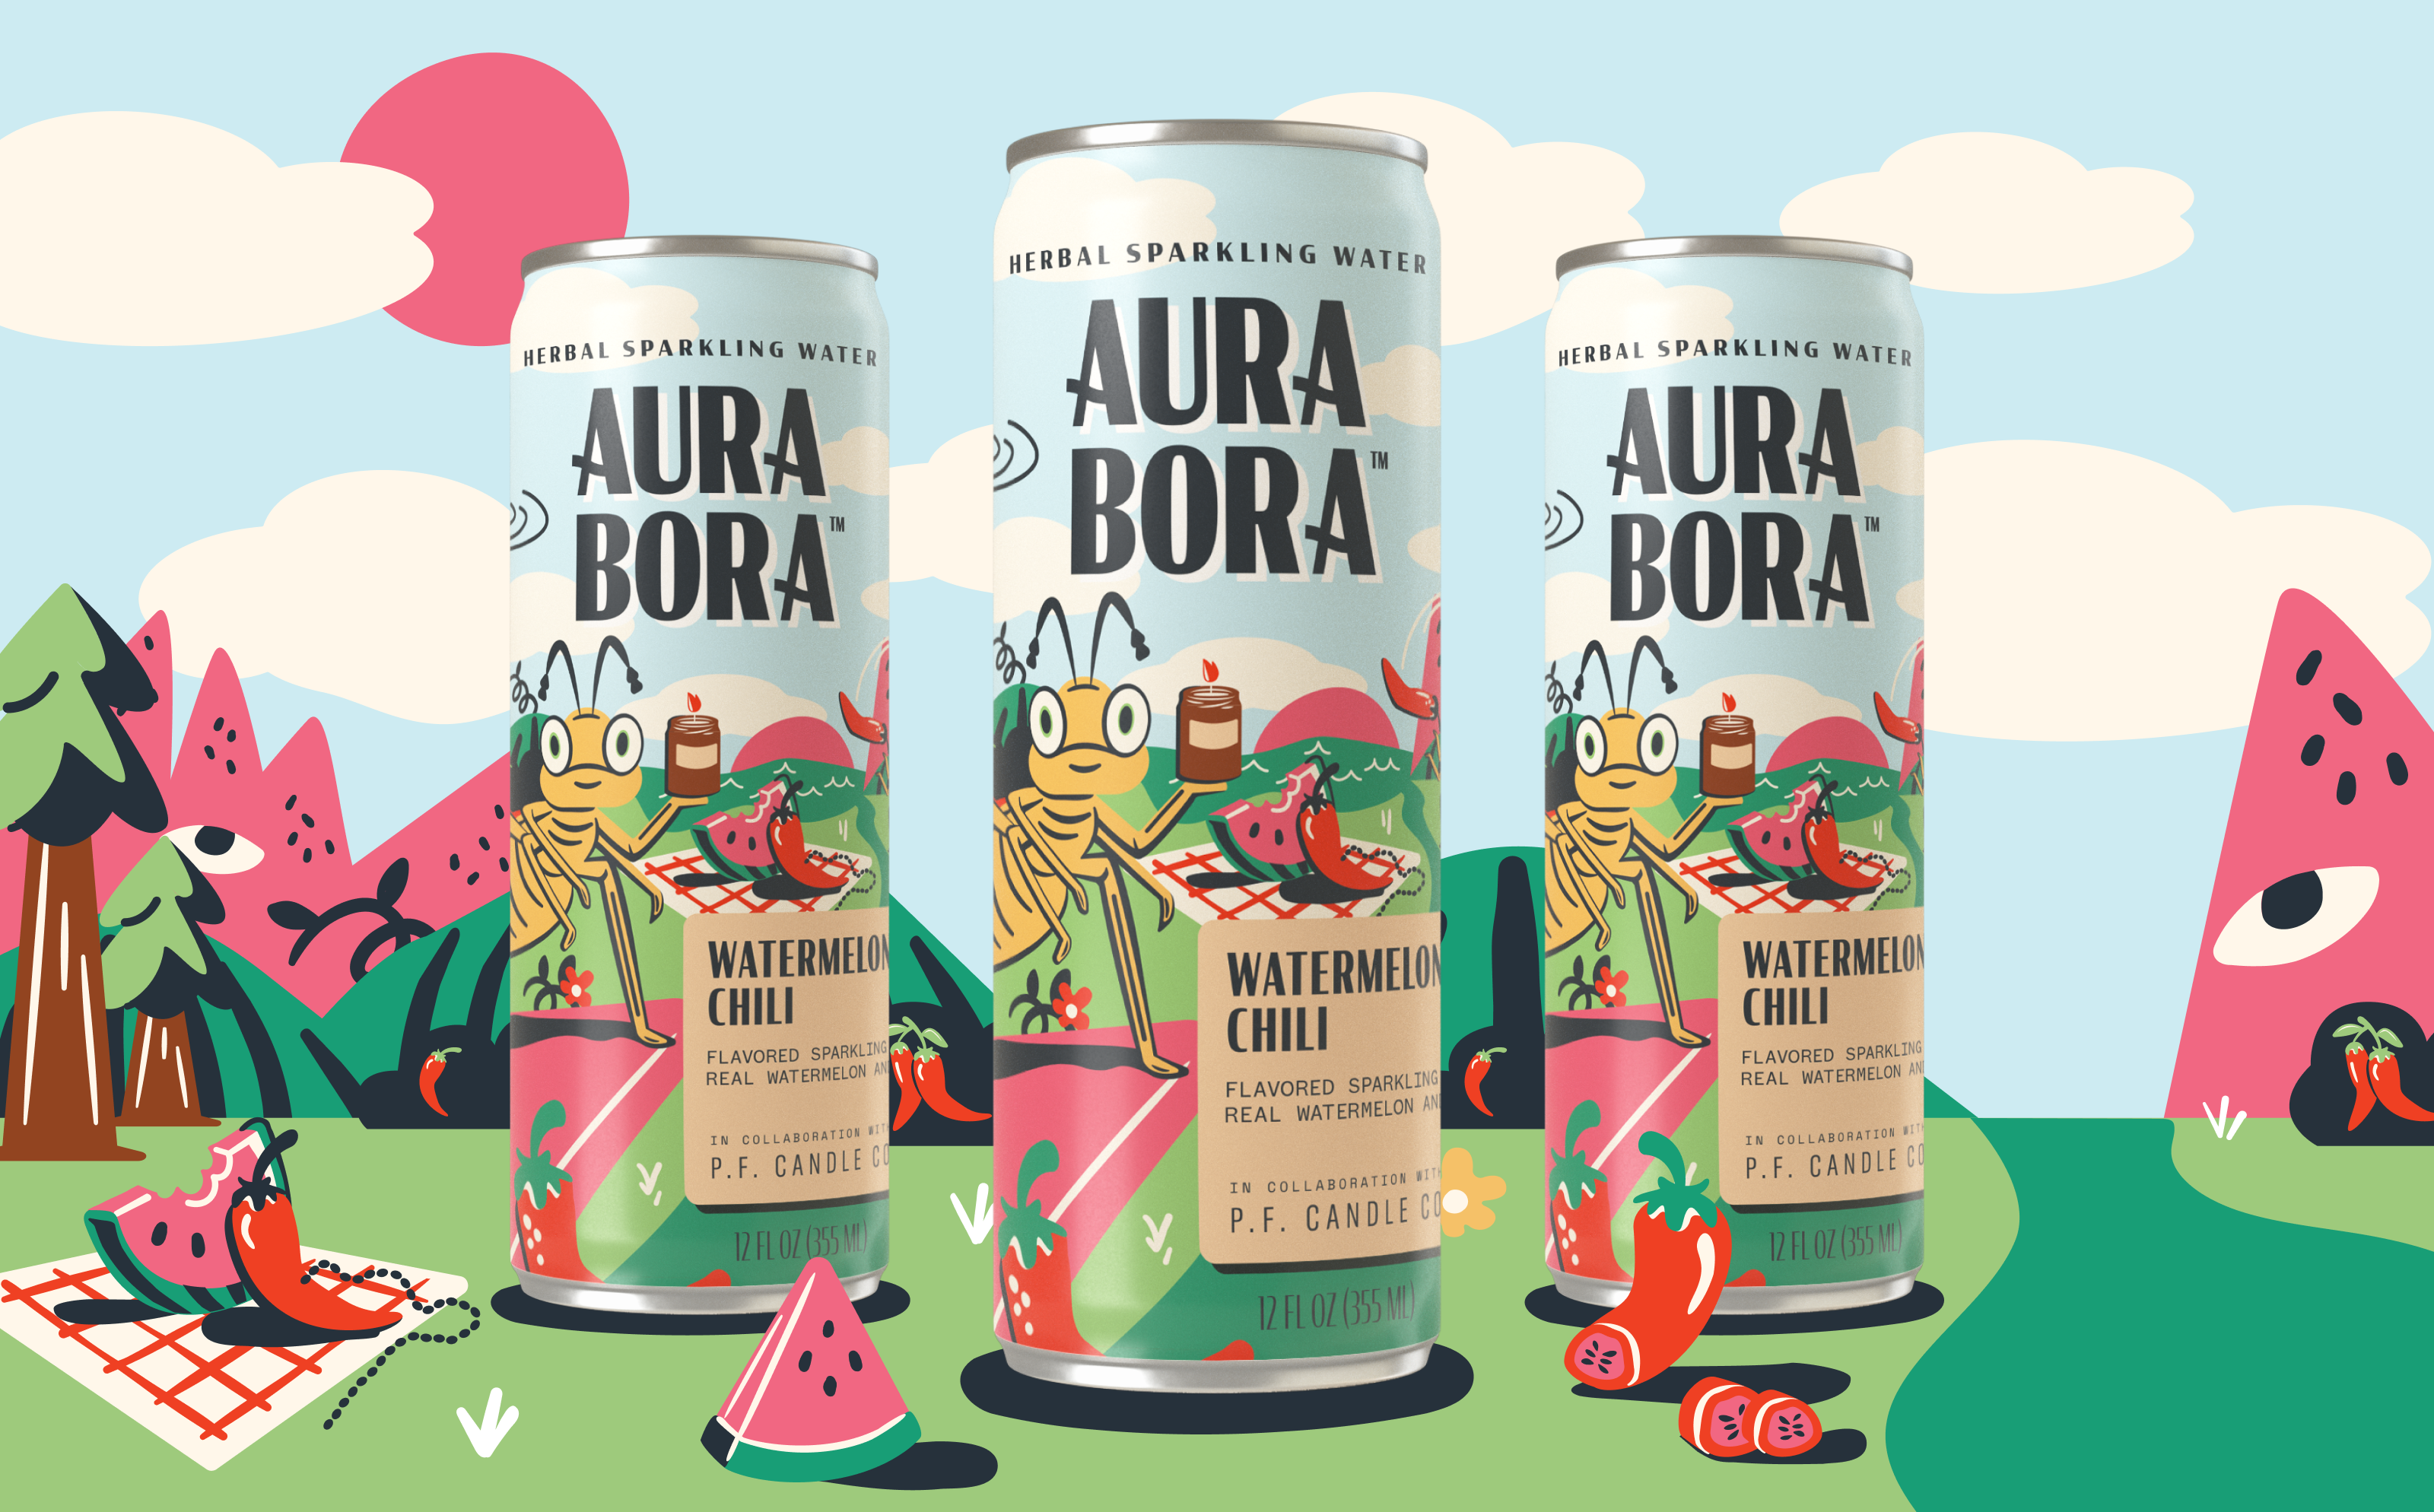 Critics Think Aura Bora’s Sparkling Water Flavors Sound Like Candles, So They Made a Drink Inspired by One